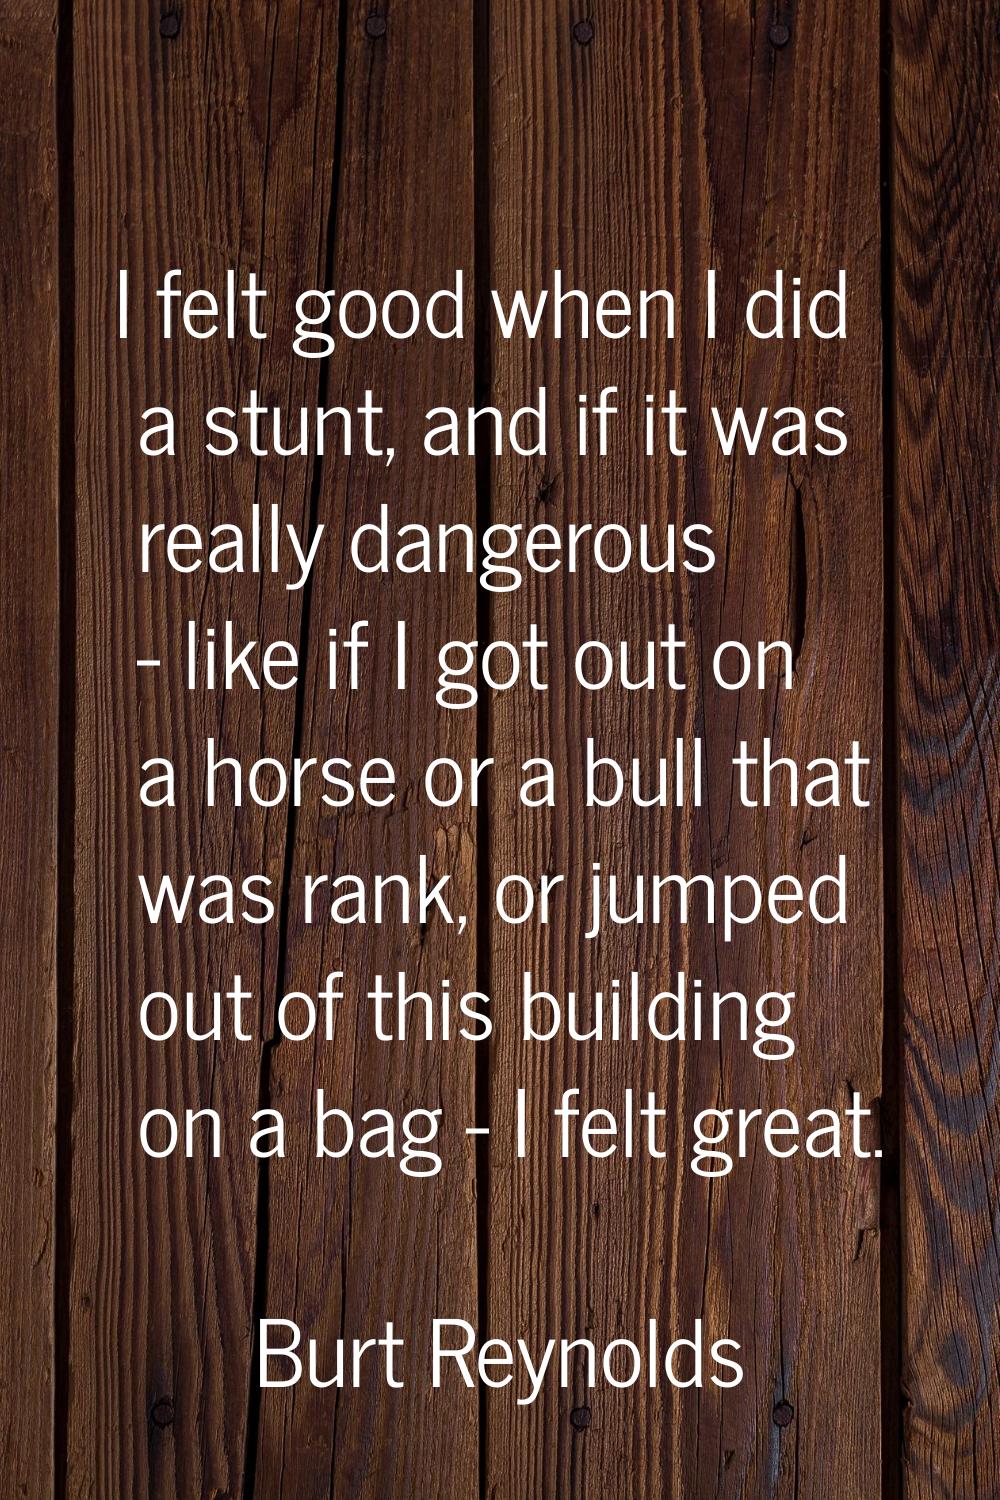 I felt good when I did a stunt, and if it was really dangerous - like if I got out on a horse or a 